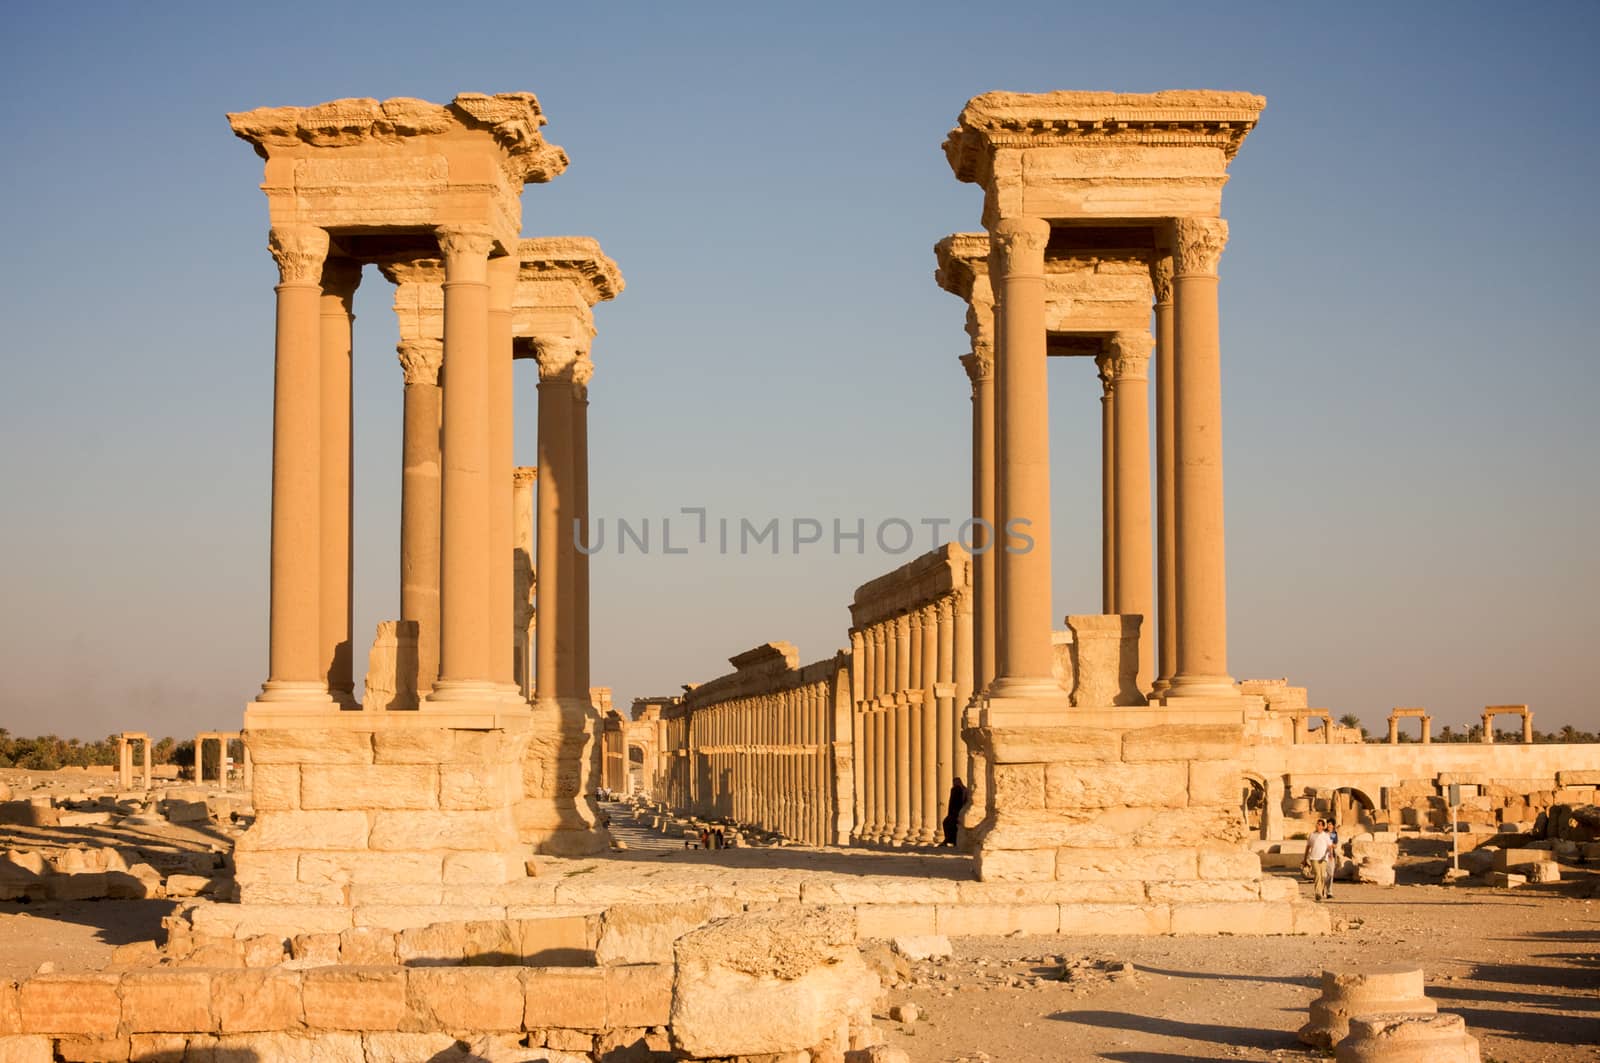 Palmyre Syria 2009 This ancient site has many Roman ruins, these standing columns shot in late afternoon sun with the tetrapylons . High quality photo